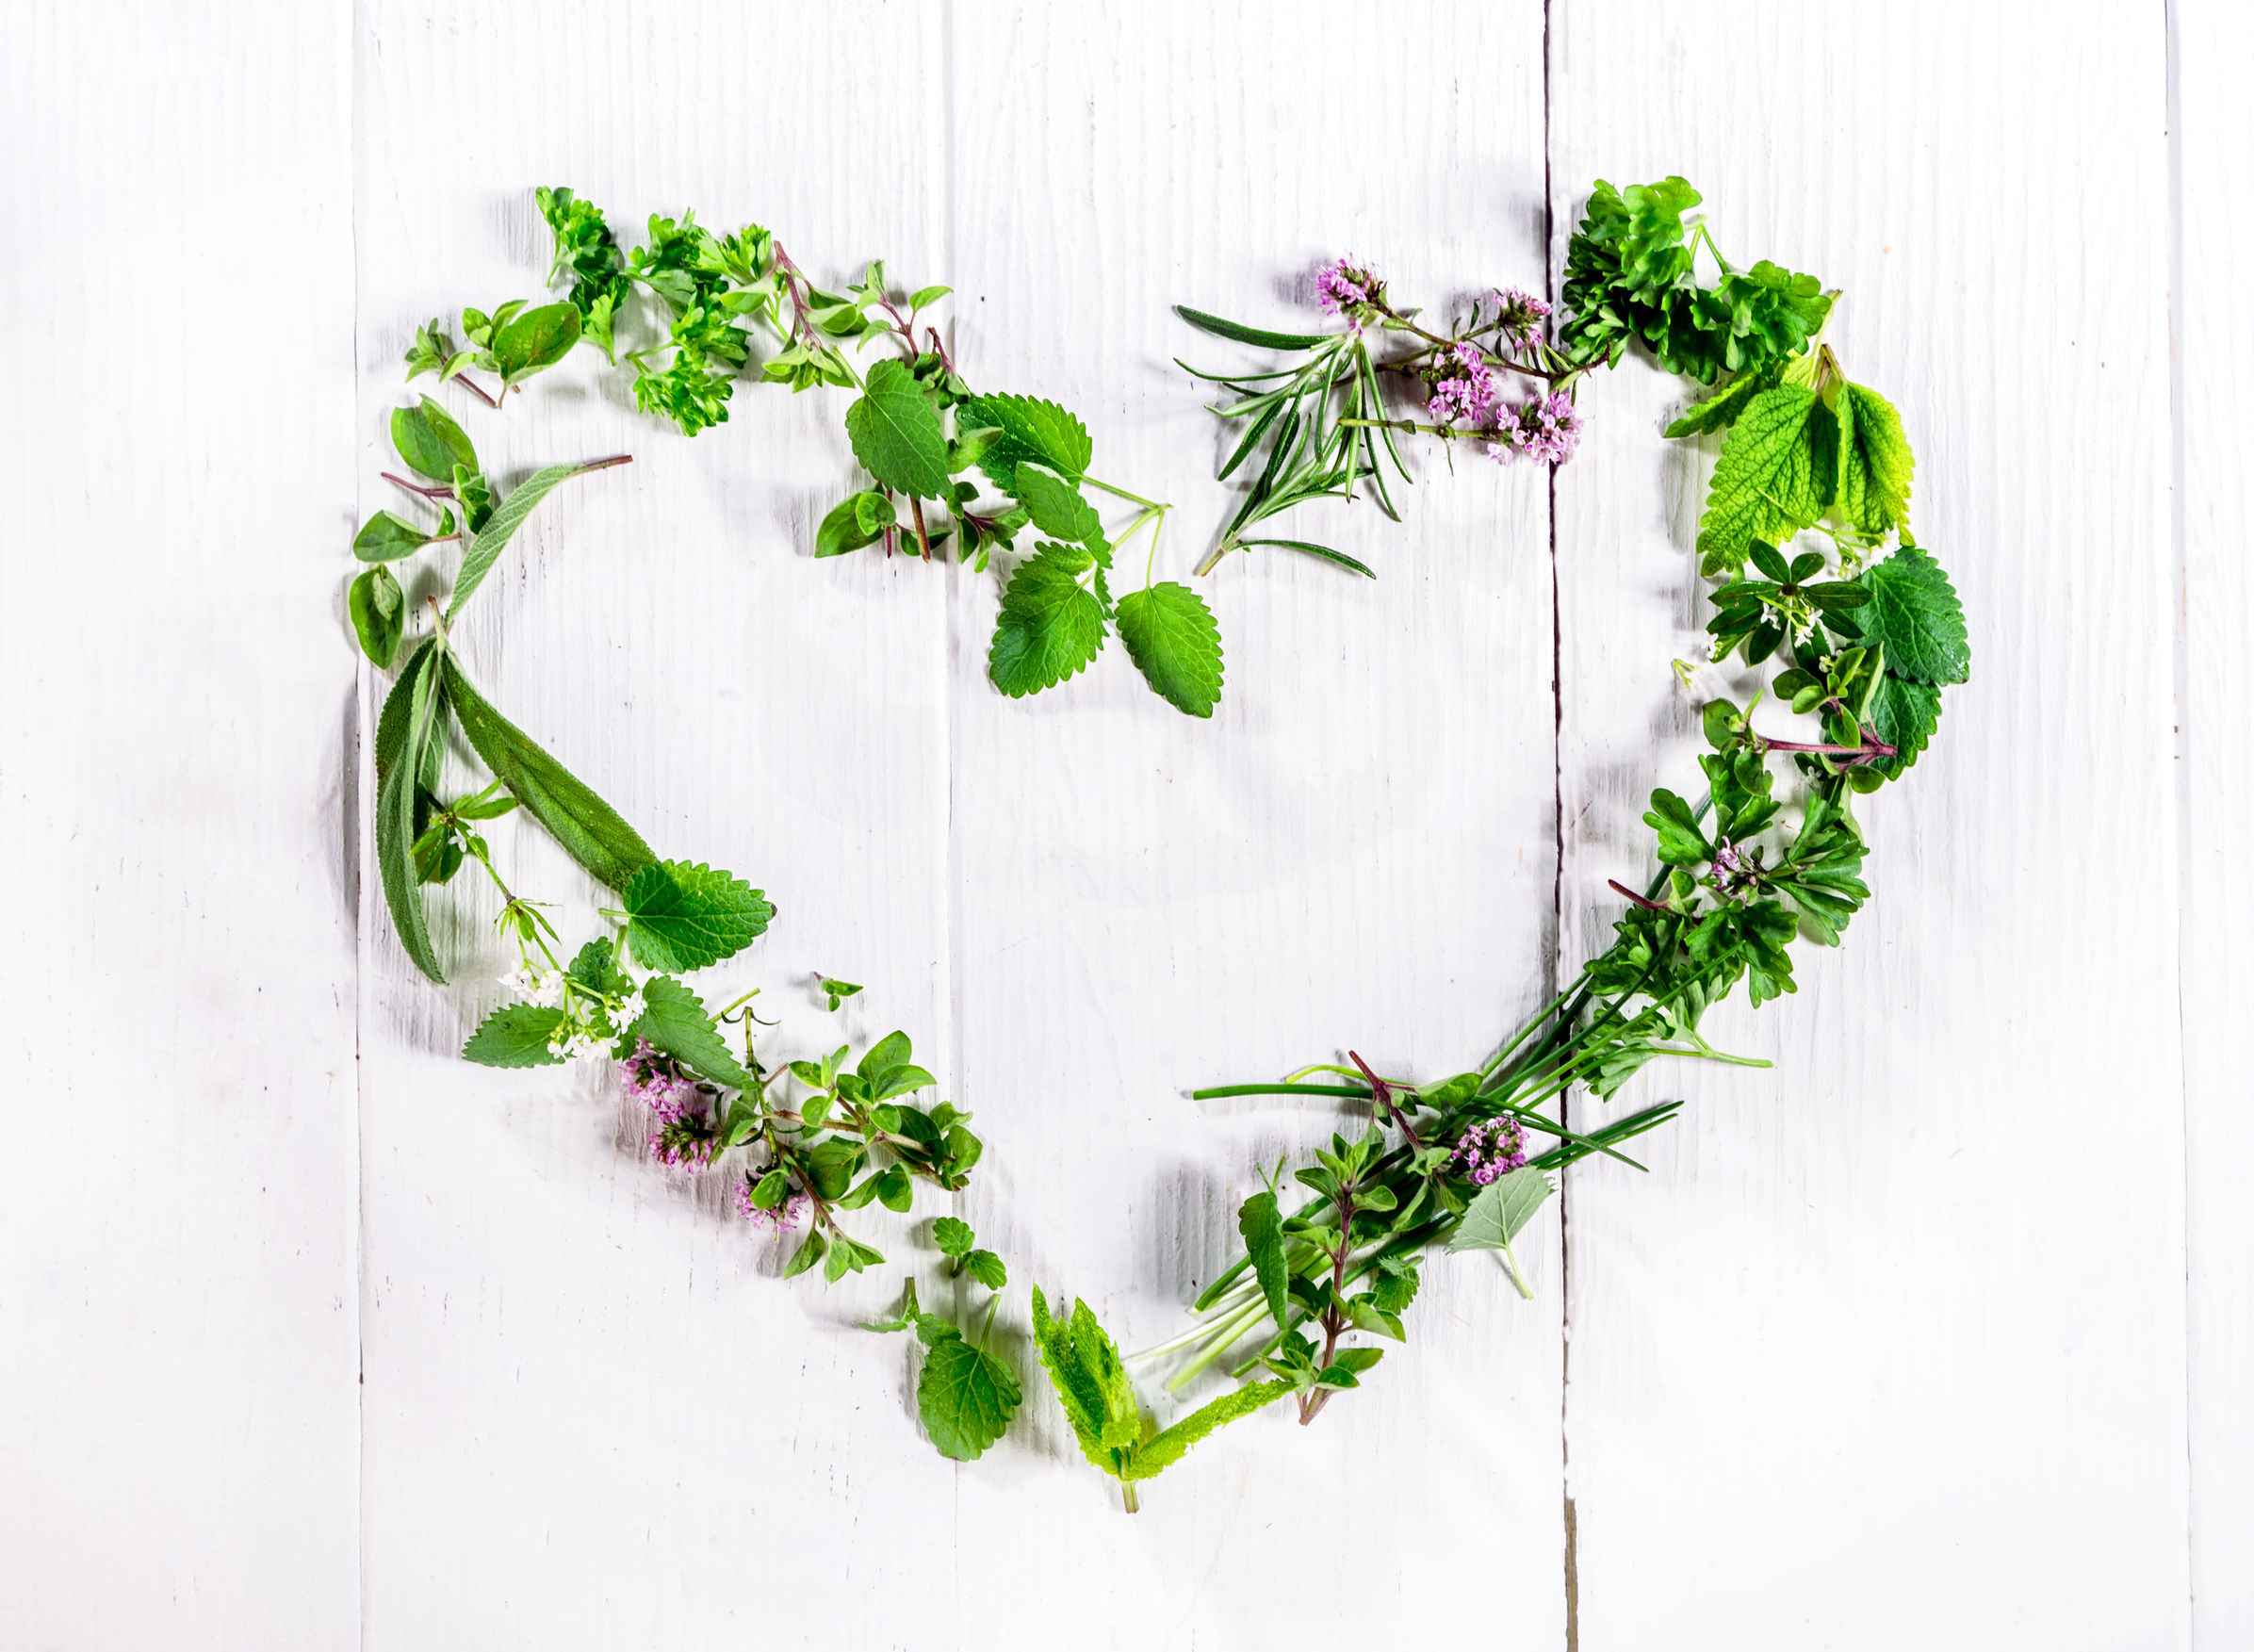 28651652 - heart shaped frame of assorted sprigs of fresh green culinary herbs arranged on a rustic white wooden background symbolic of love and romance with central copyspace